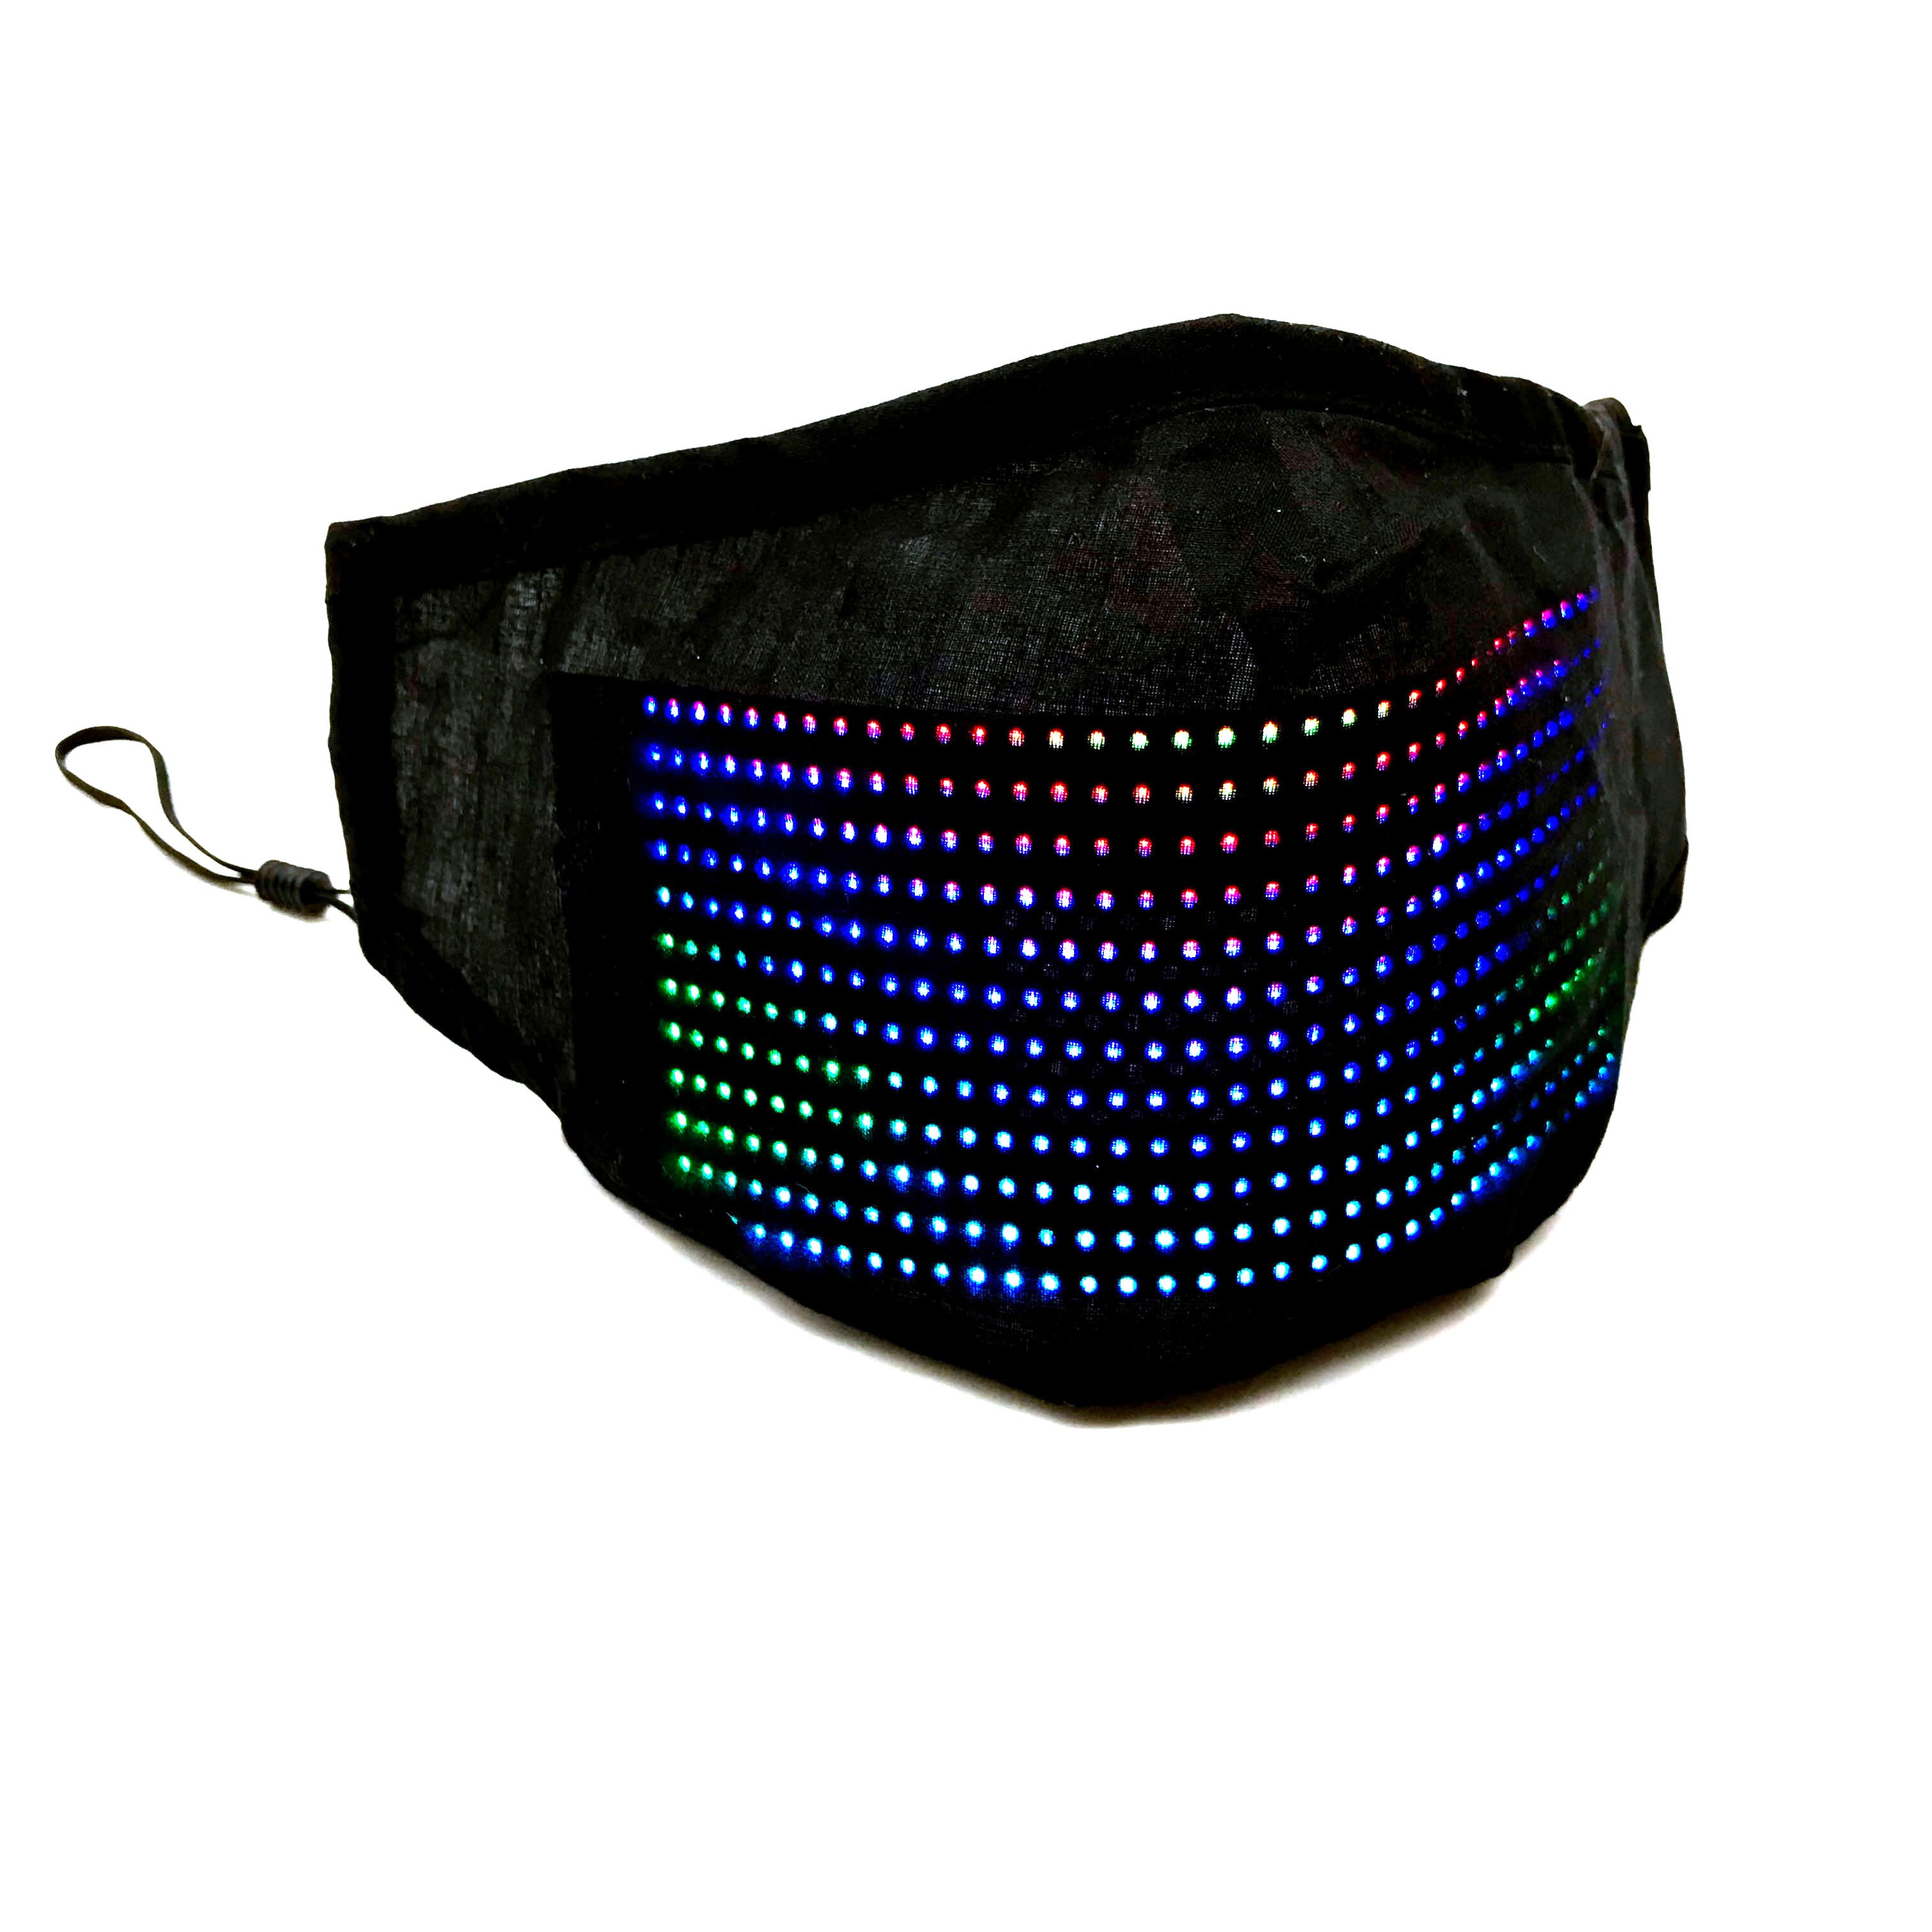 Rechargeable battery 4 color Rave Mask light up Led Luminous Face Mask for Halloween Masquerade Party: RGB FUllcolor